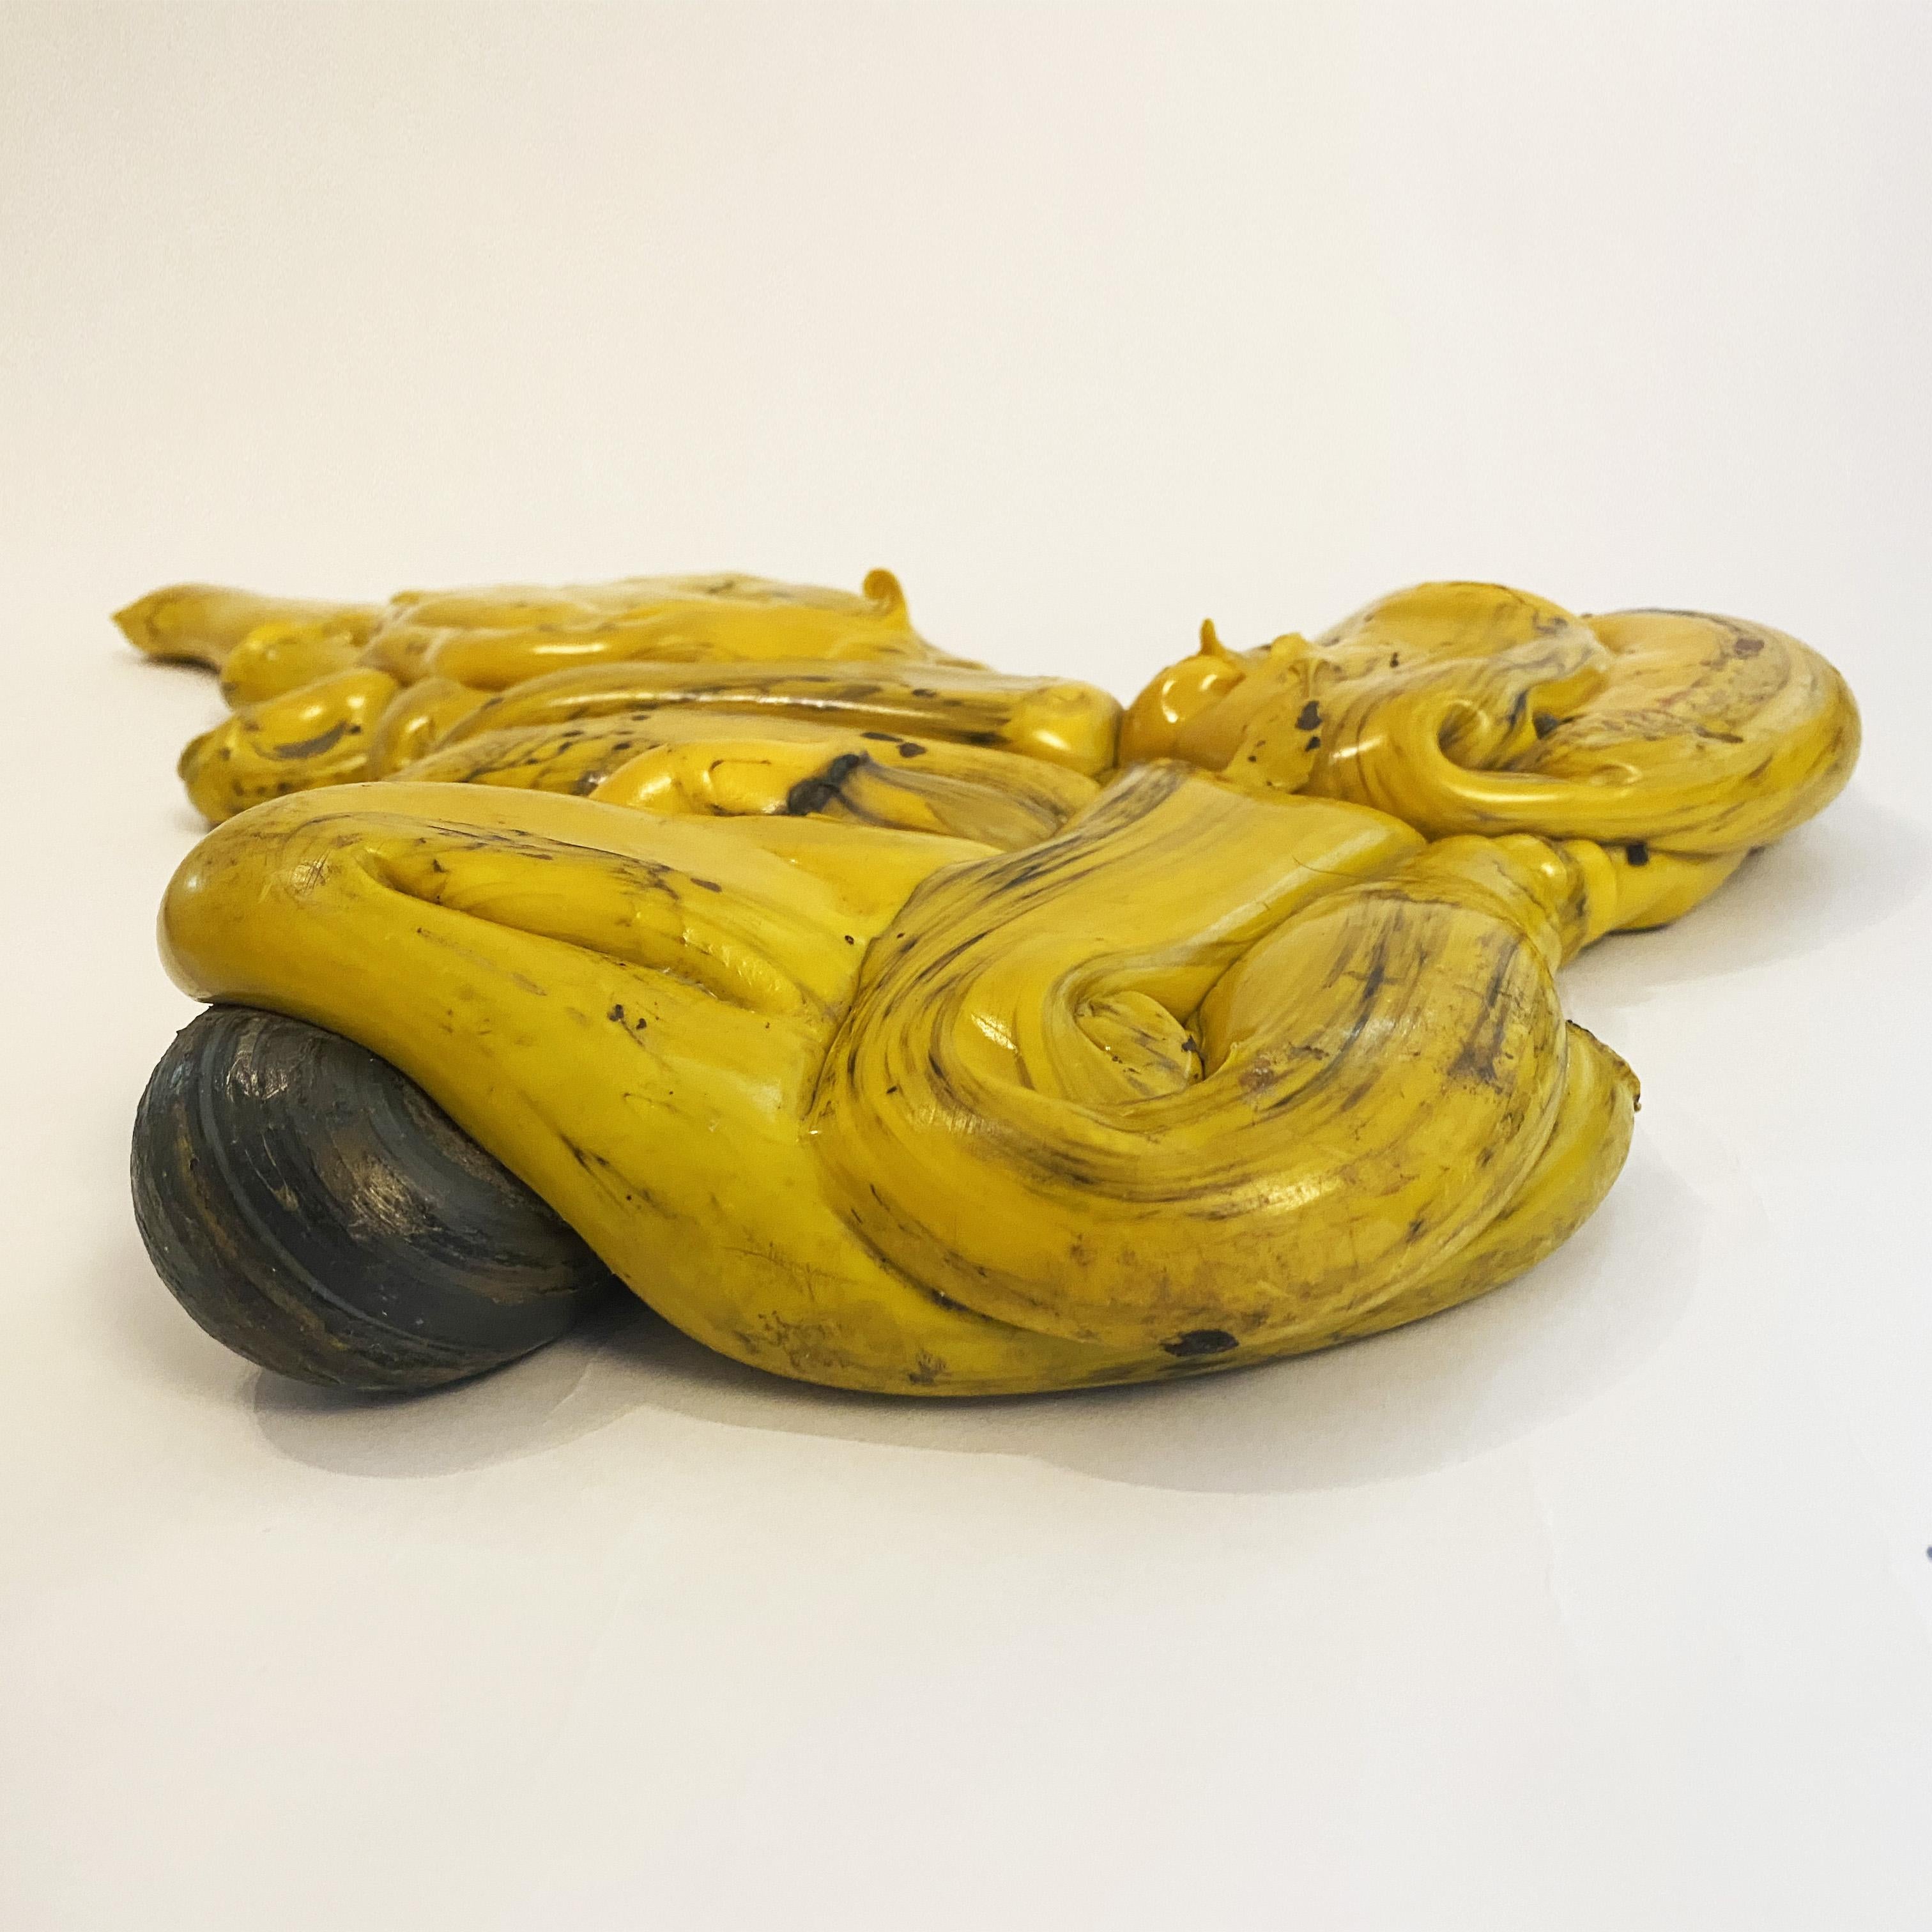 Resin Sculptural Centerpiece in the Manner of Gaetano Pesce, 1990s For Sale